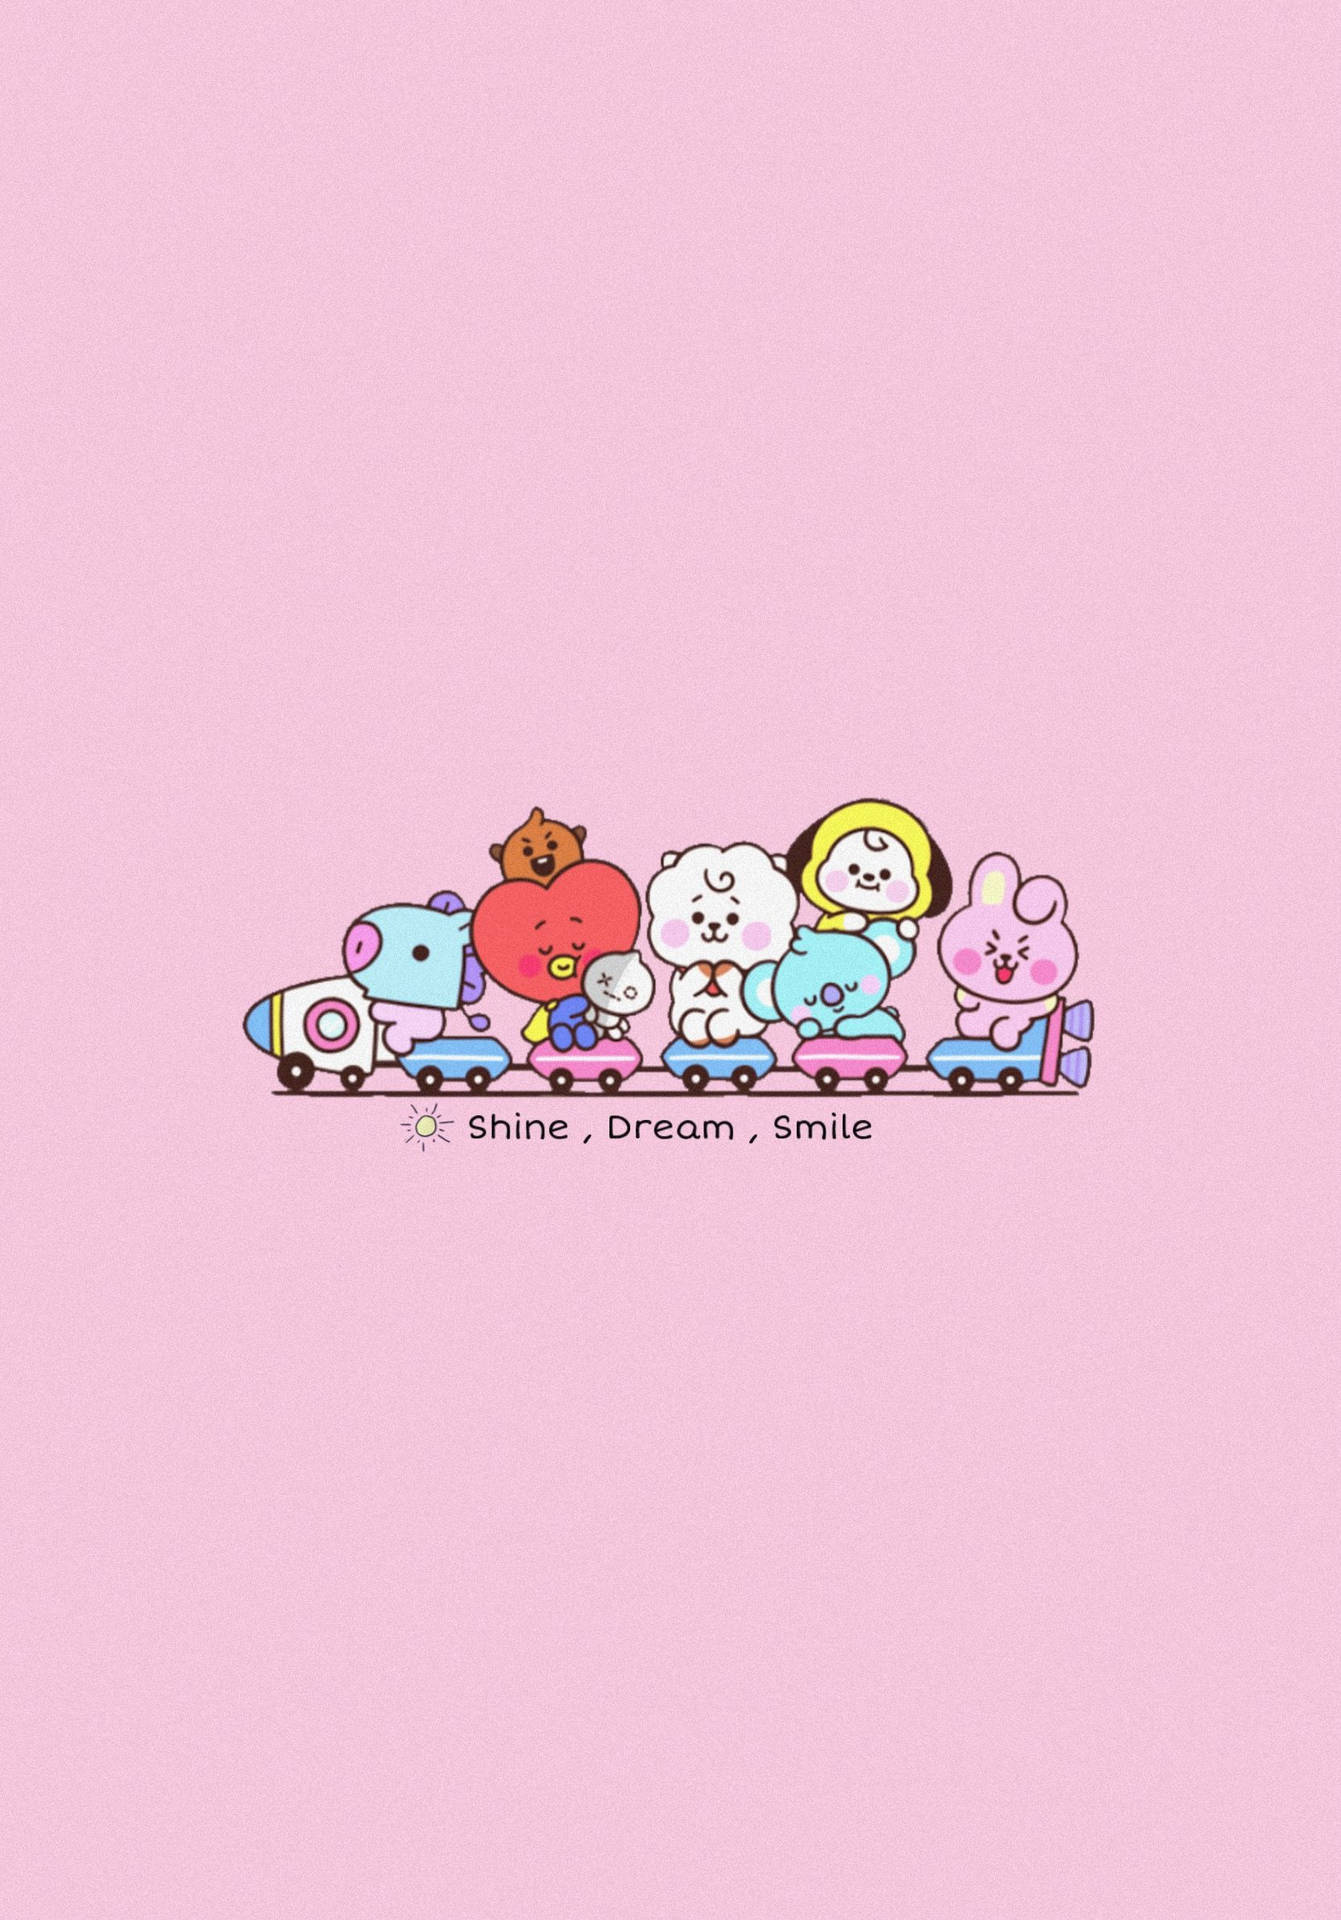 A pink background with cartoon characters on it - BT21